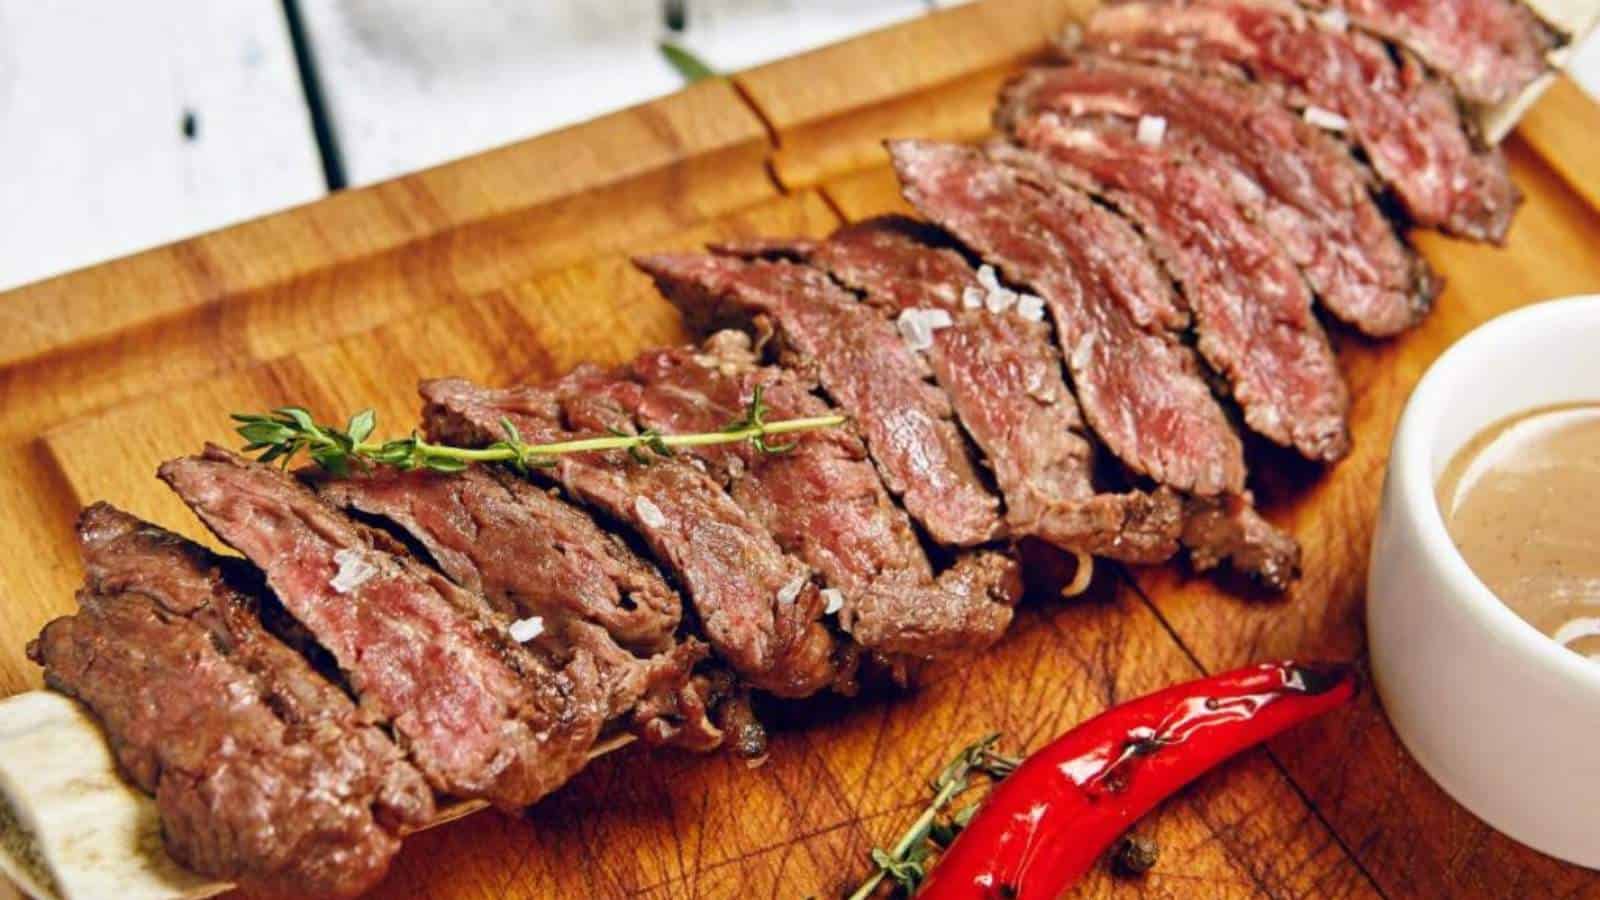 Sliced medium-rare grilled steak garnished with thyme and a red chili pepper on a wooden cutting board.